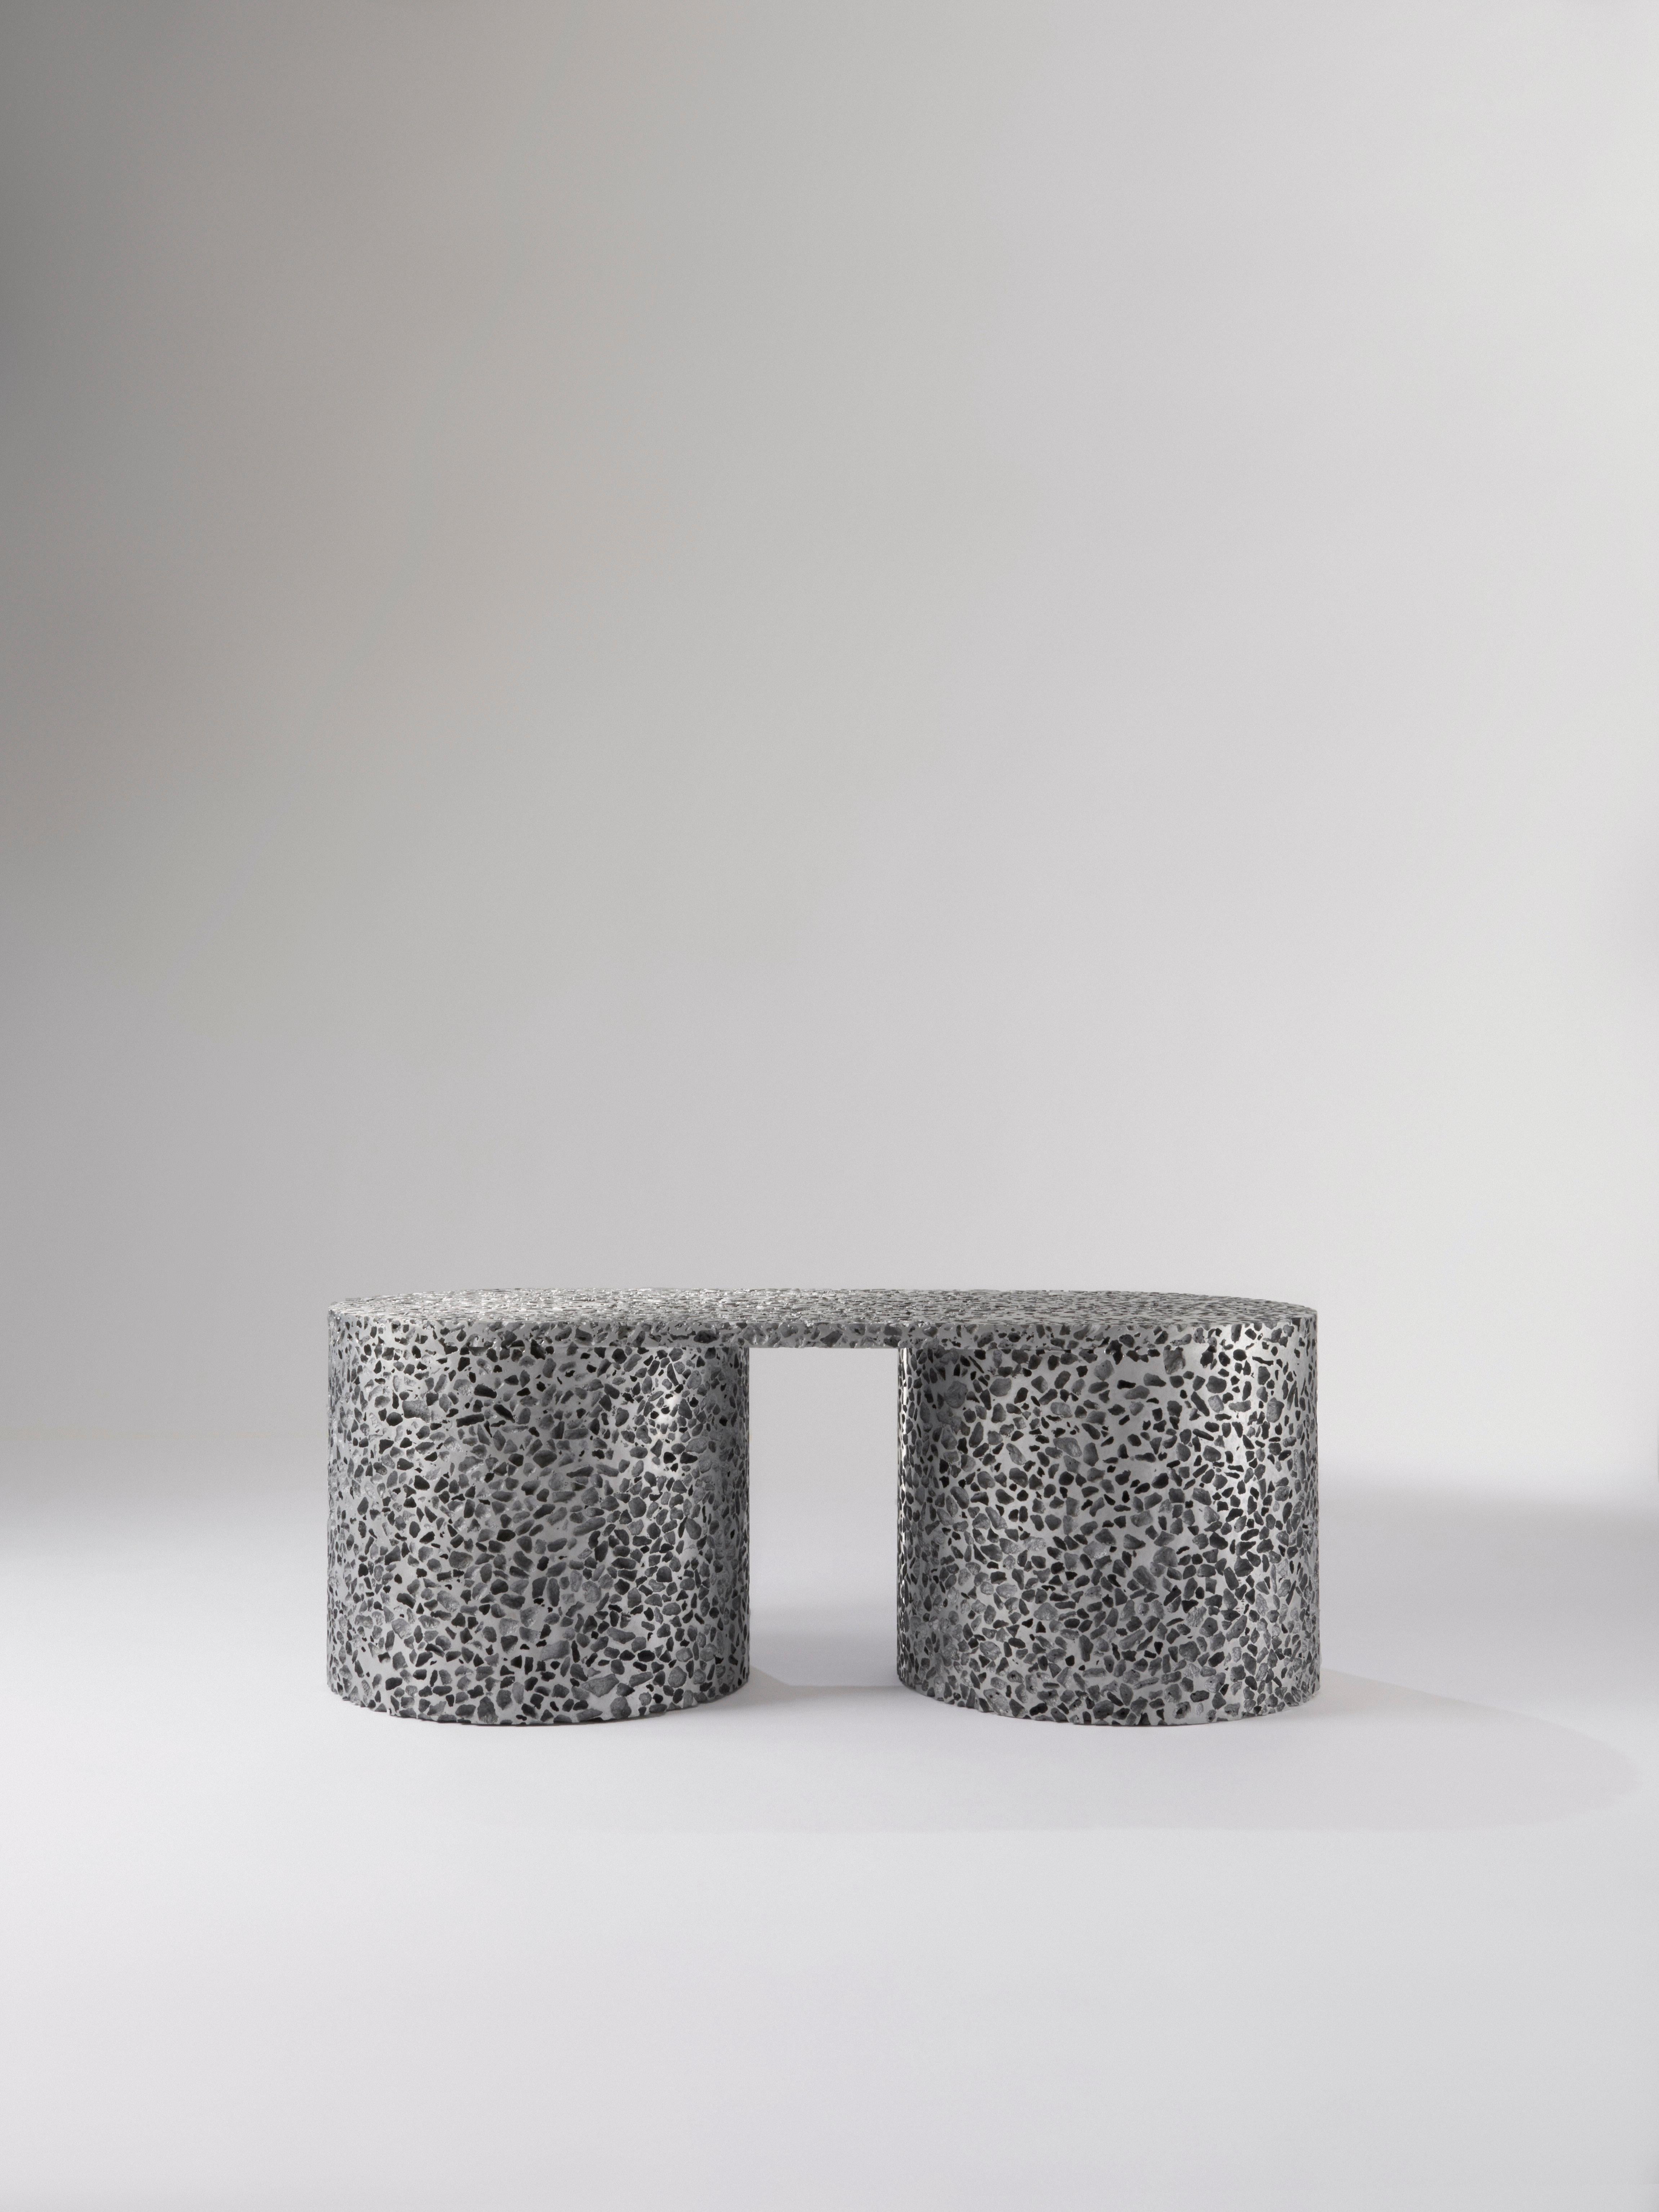 This coffee table is a functional piece of furniture, but it's also a diptych created from the microcosm of random structures of the open-cell aluminum foam and the severity and preciseness embedded in the industrial metal processes the humans have